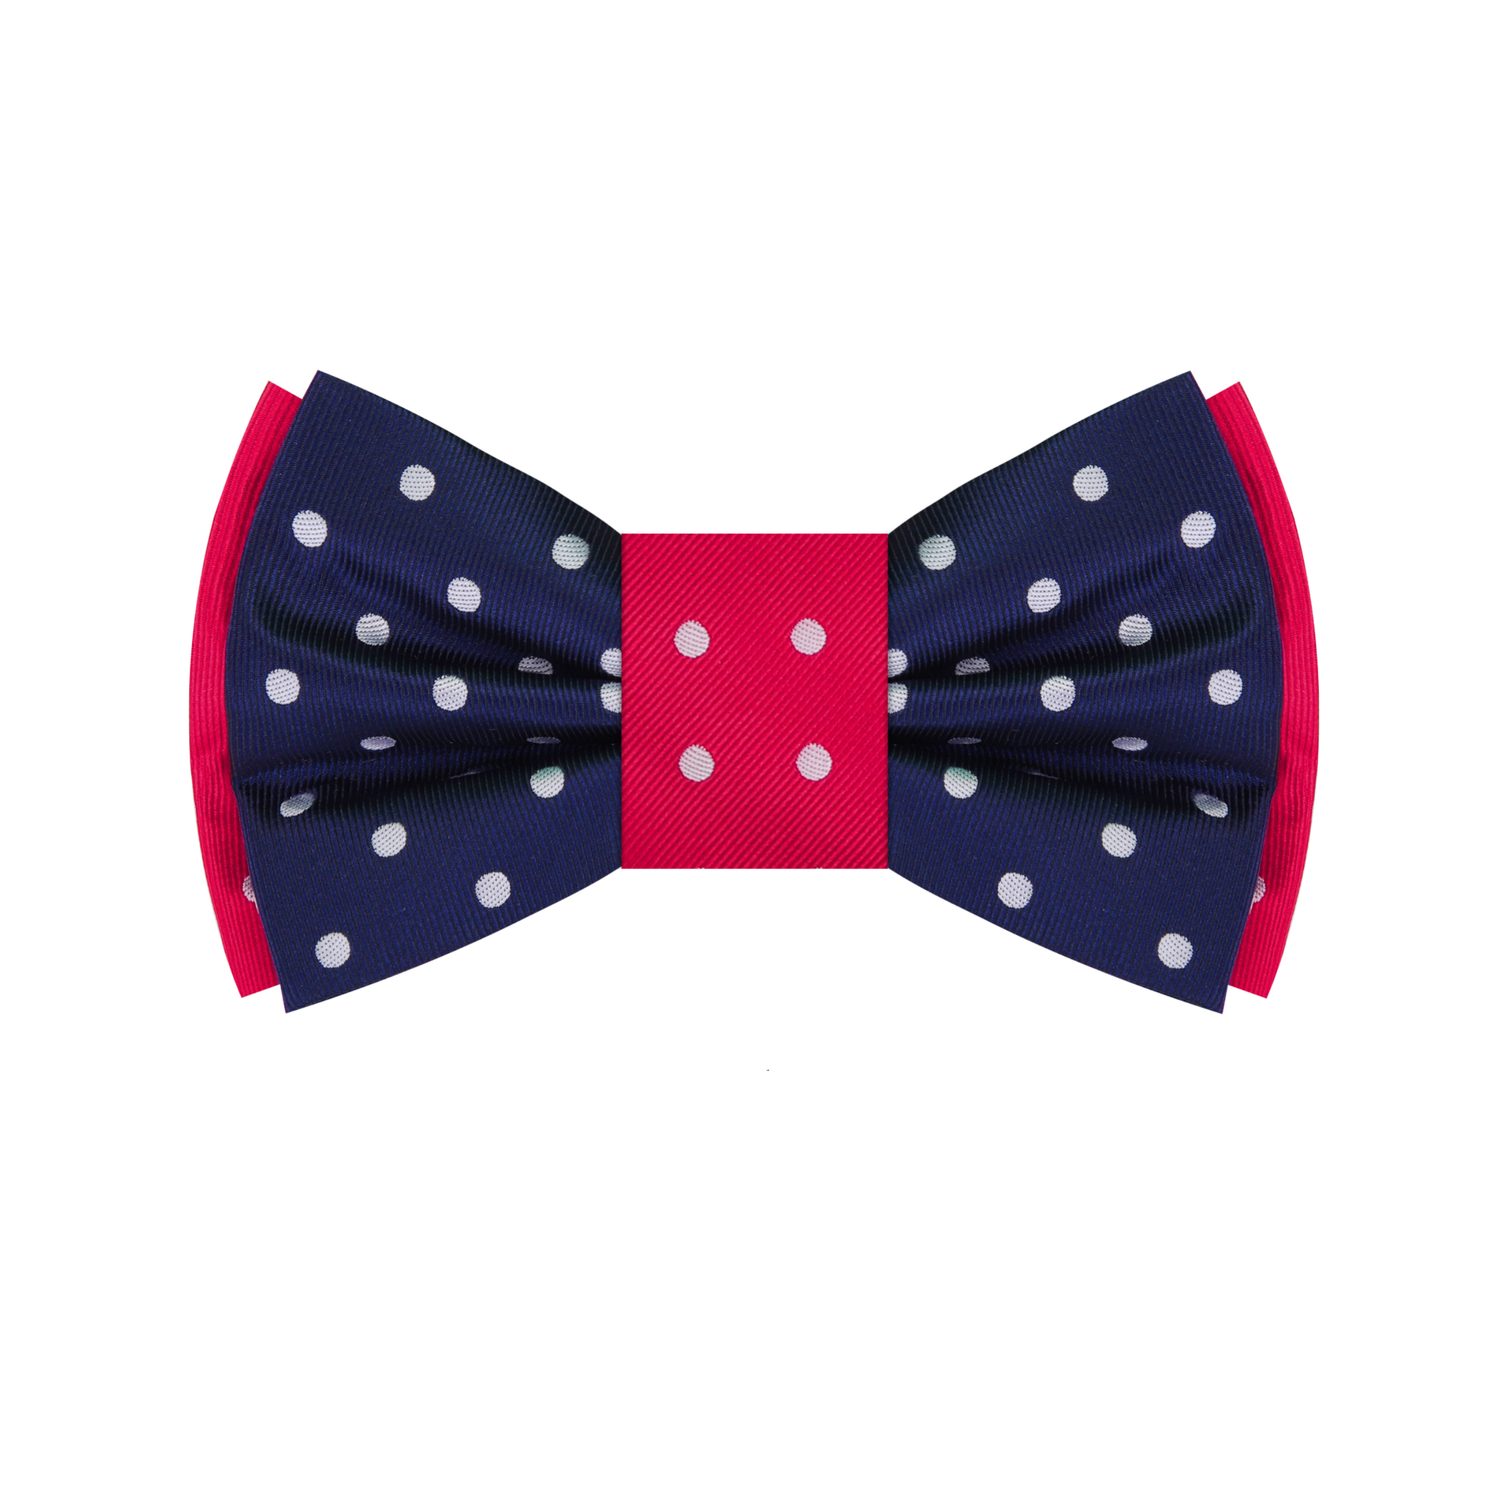 Double Sided Blue, Grey, Red Polka Dot Bow Tie Pre Tied